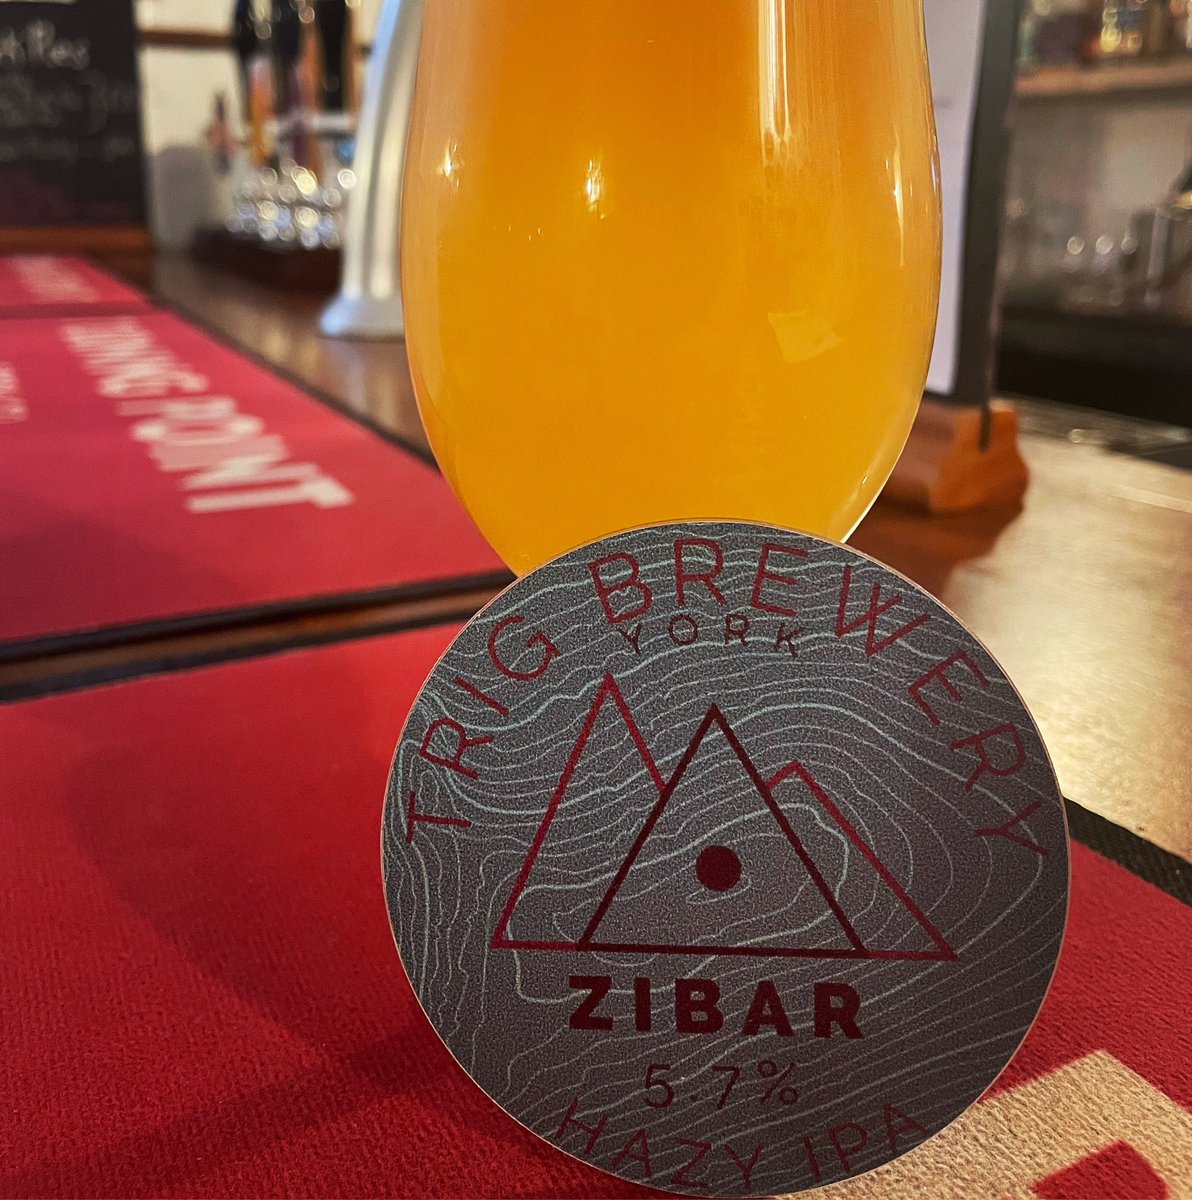 A new @TrigBrewery joining us on tap!! Zibar is a heavily hopped hazy IPA packed with pineapple juiciness cut with pink grapefruit bitterness. These exotic fruit flavours are laid on to an oat and wheat filled base to make a smooth drinking IPA.